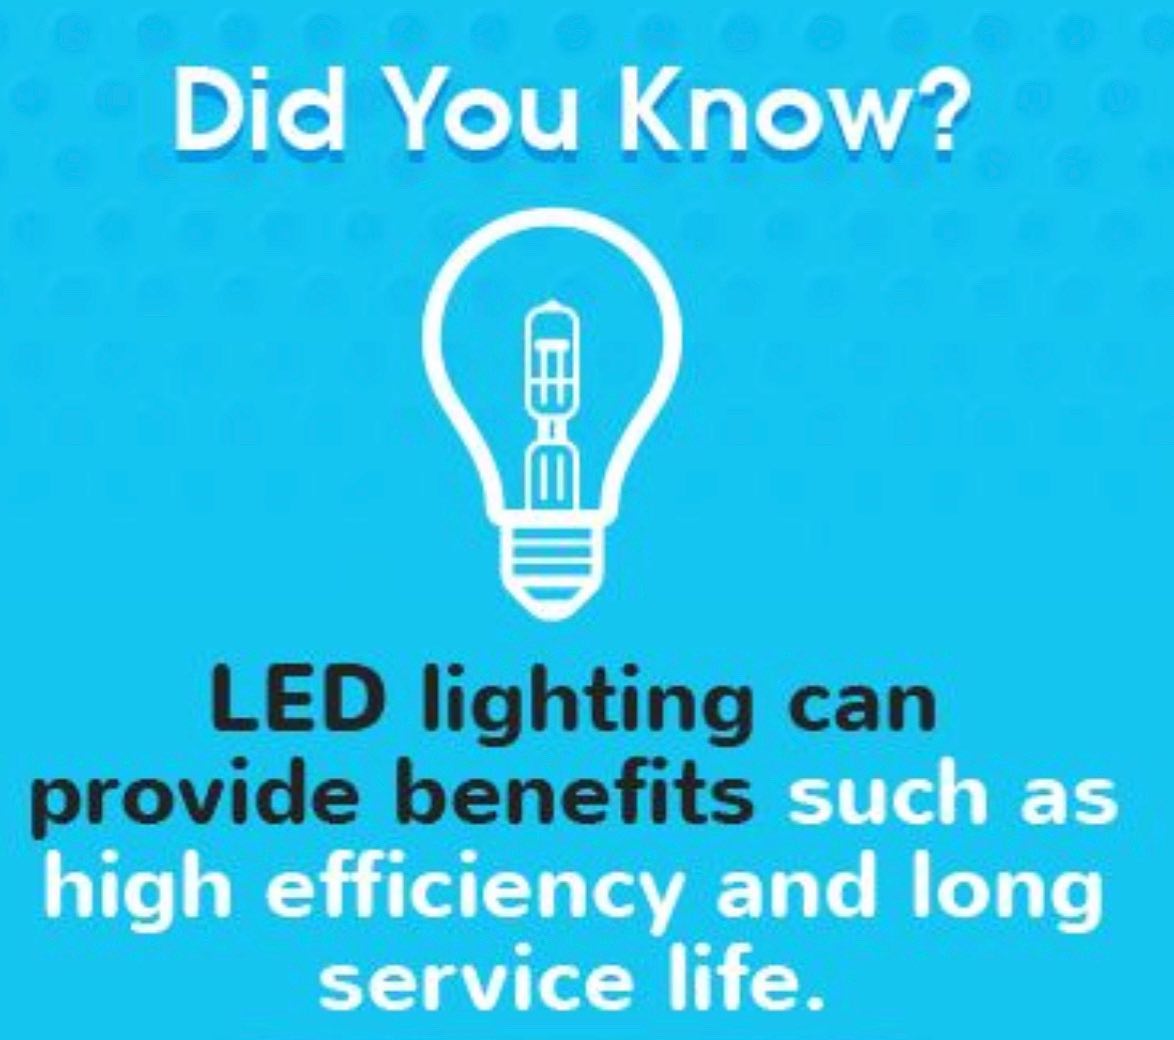 Did you know?  www.gopro-electric.com 
⚡️Go Pro Electric, Inc
#led #ledlights #energy #energyefficiency #light #smarthome #smartlighting #goproelectric #electricianlife #electricalcontractors #losangeles #didyouknow